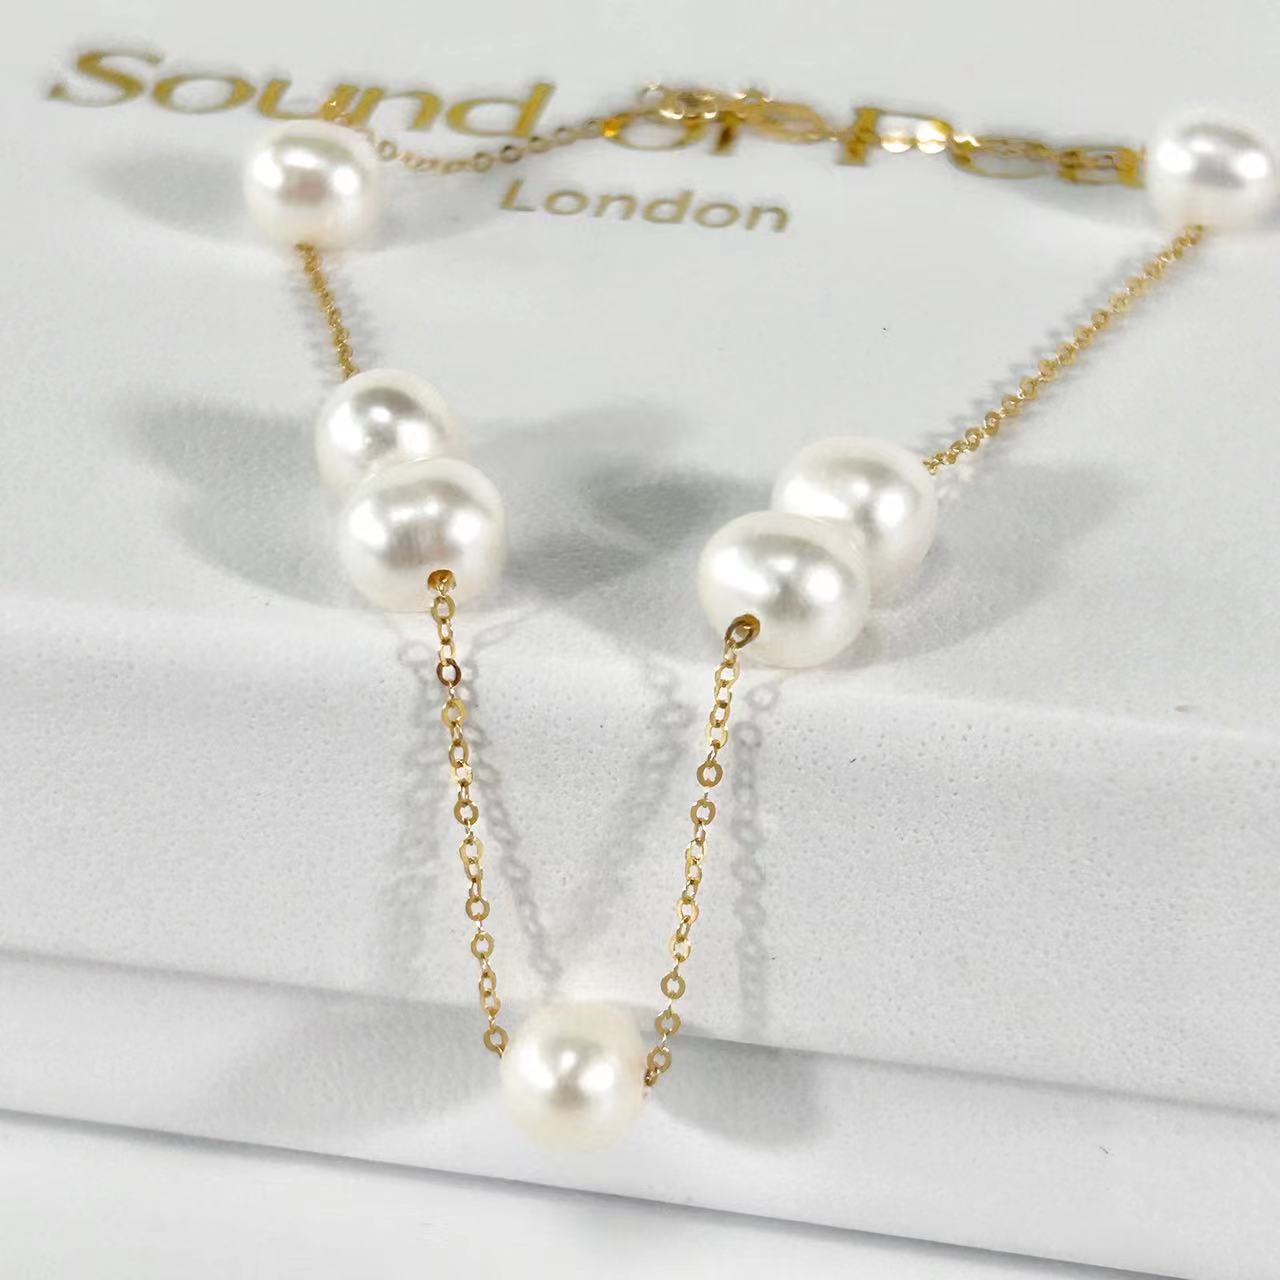 Solid 18K Gold Genuine Freshwater Pearl Gypsophila Necklace